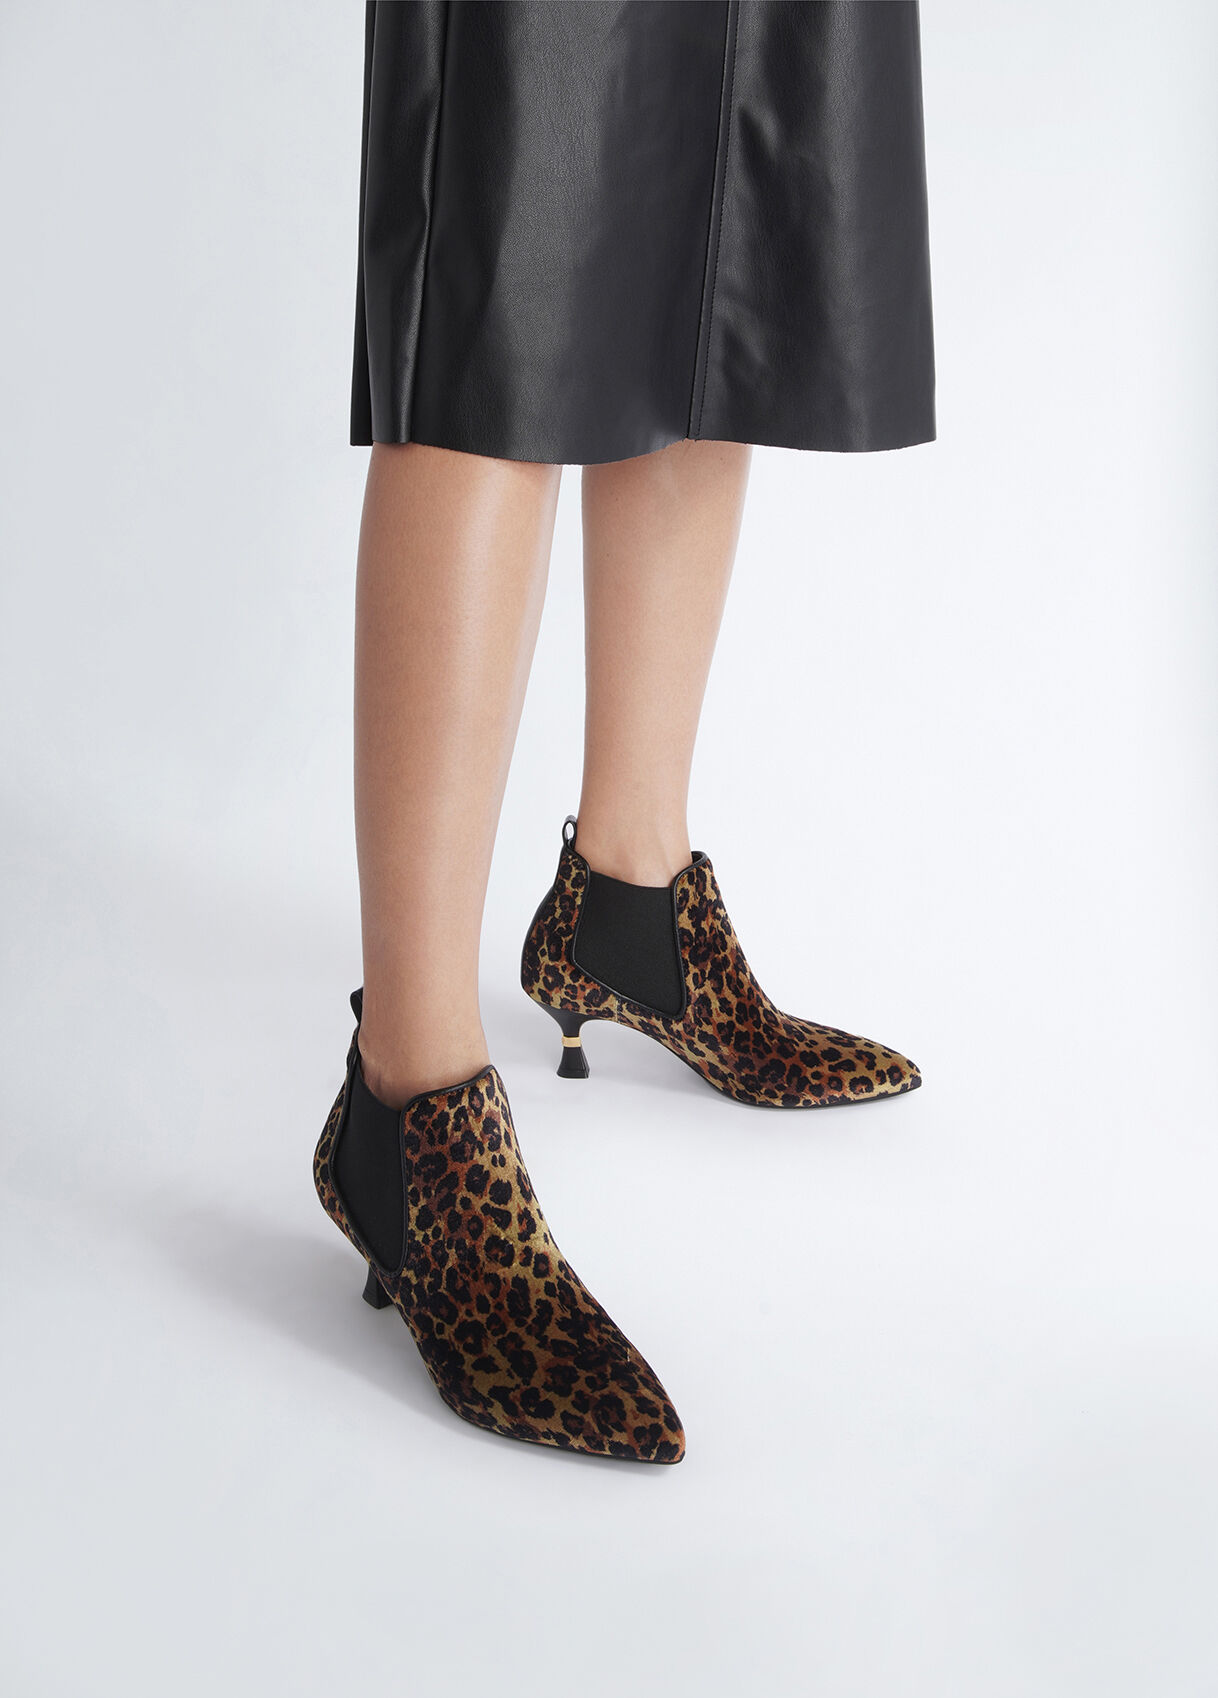 Ankle boots with low hourglass heel